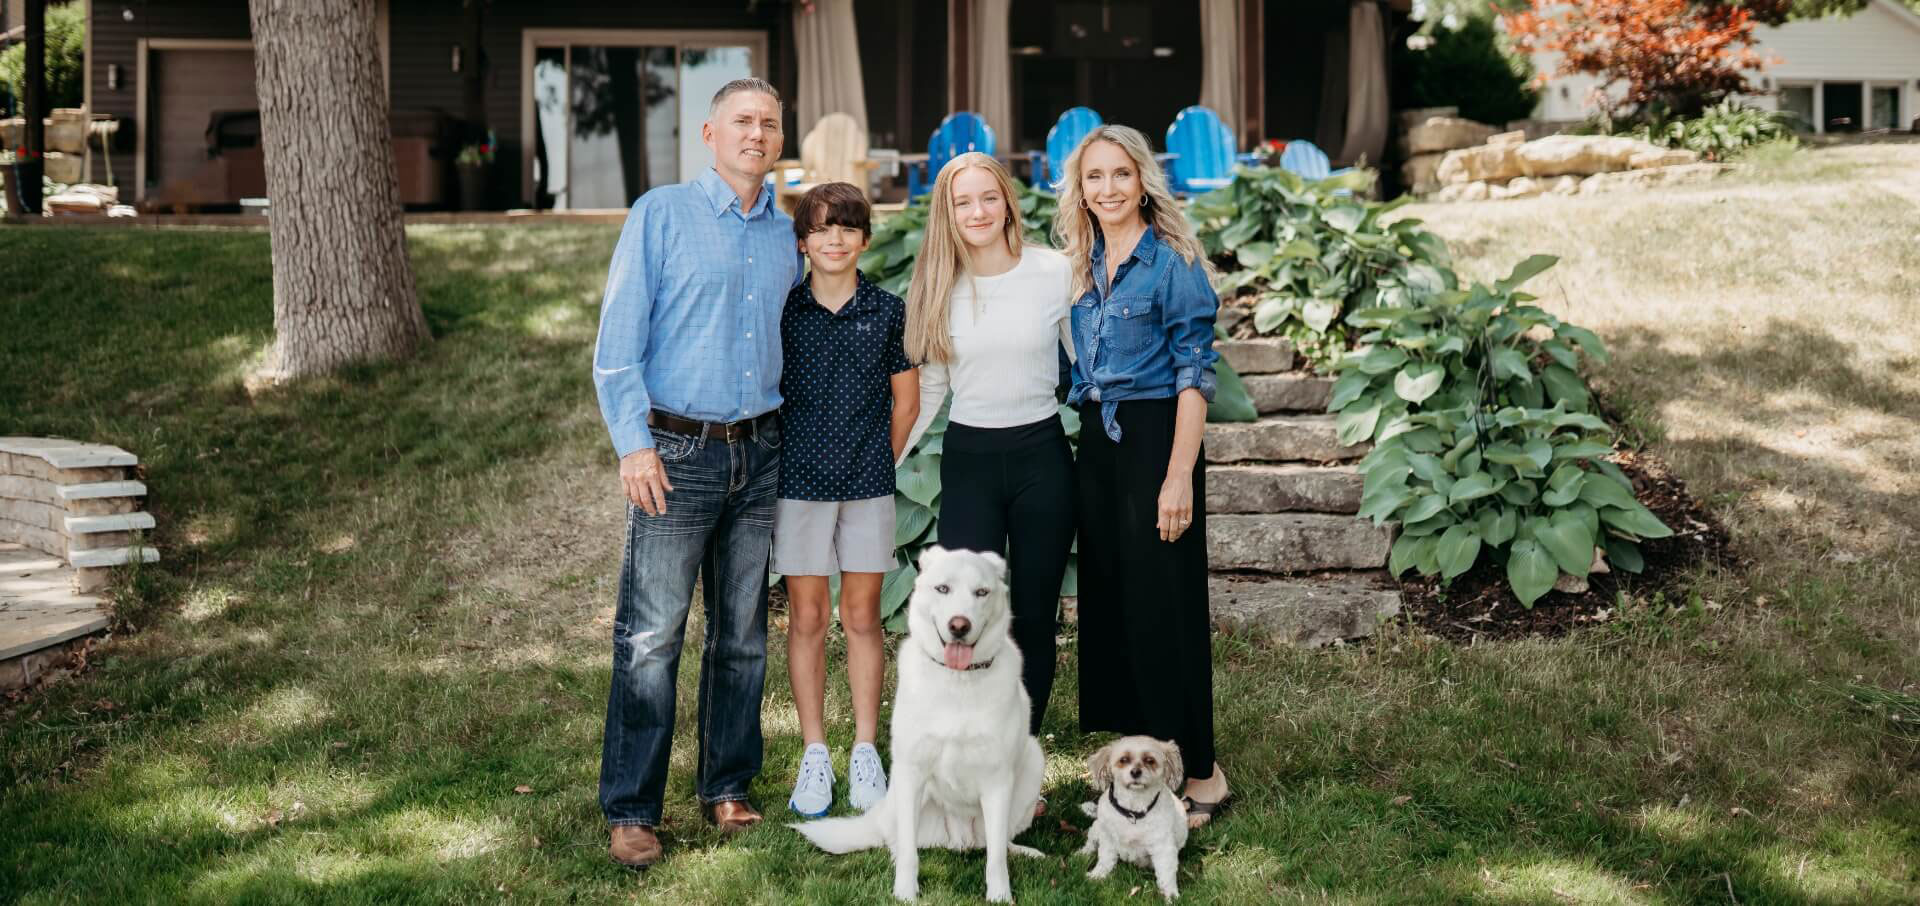 Dr. Angela Bauer and her family